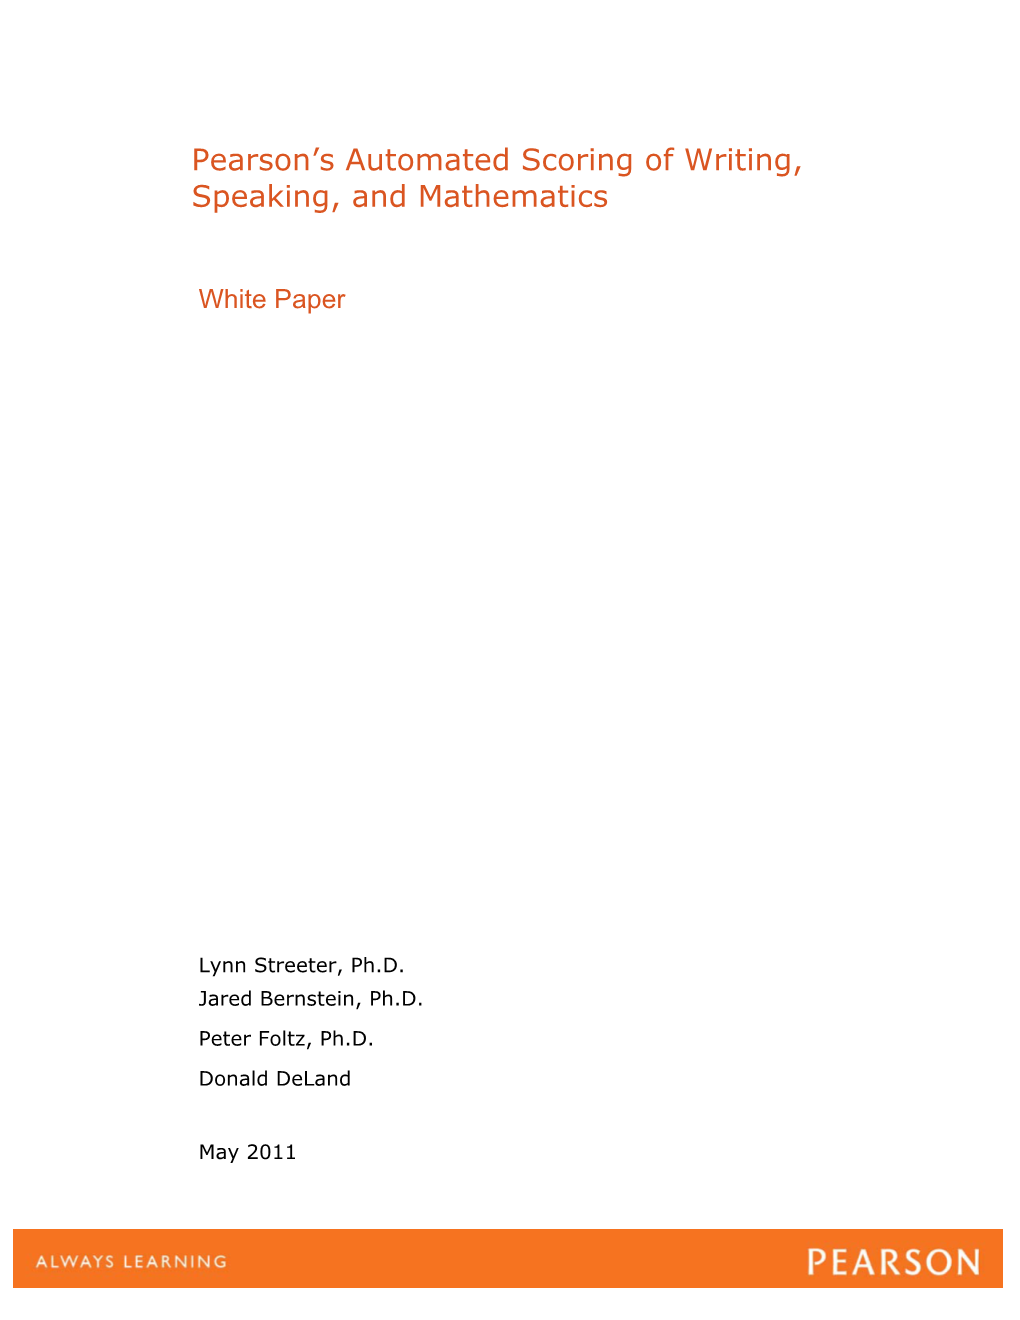 Pearson's Automated Scoring of Writing, Speaking, and Mathematics